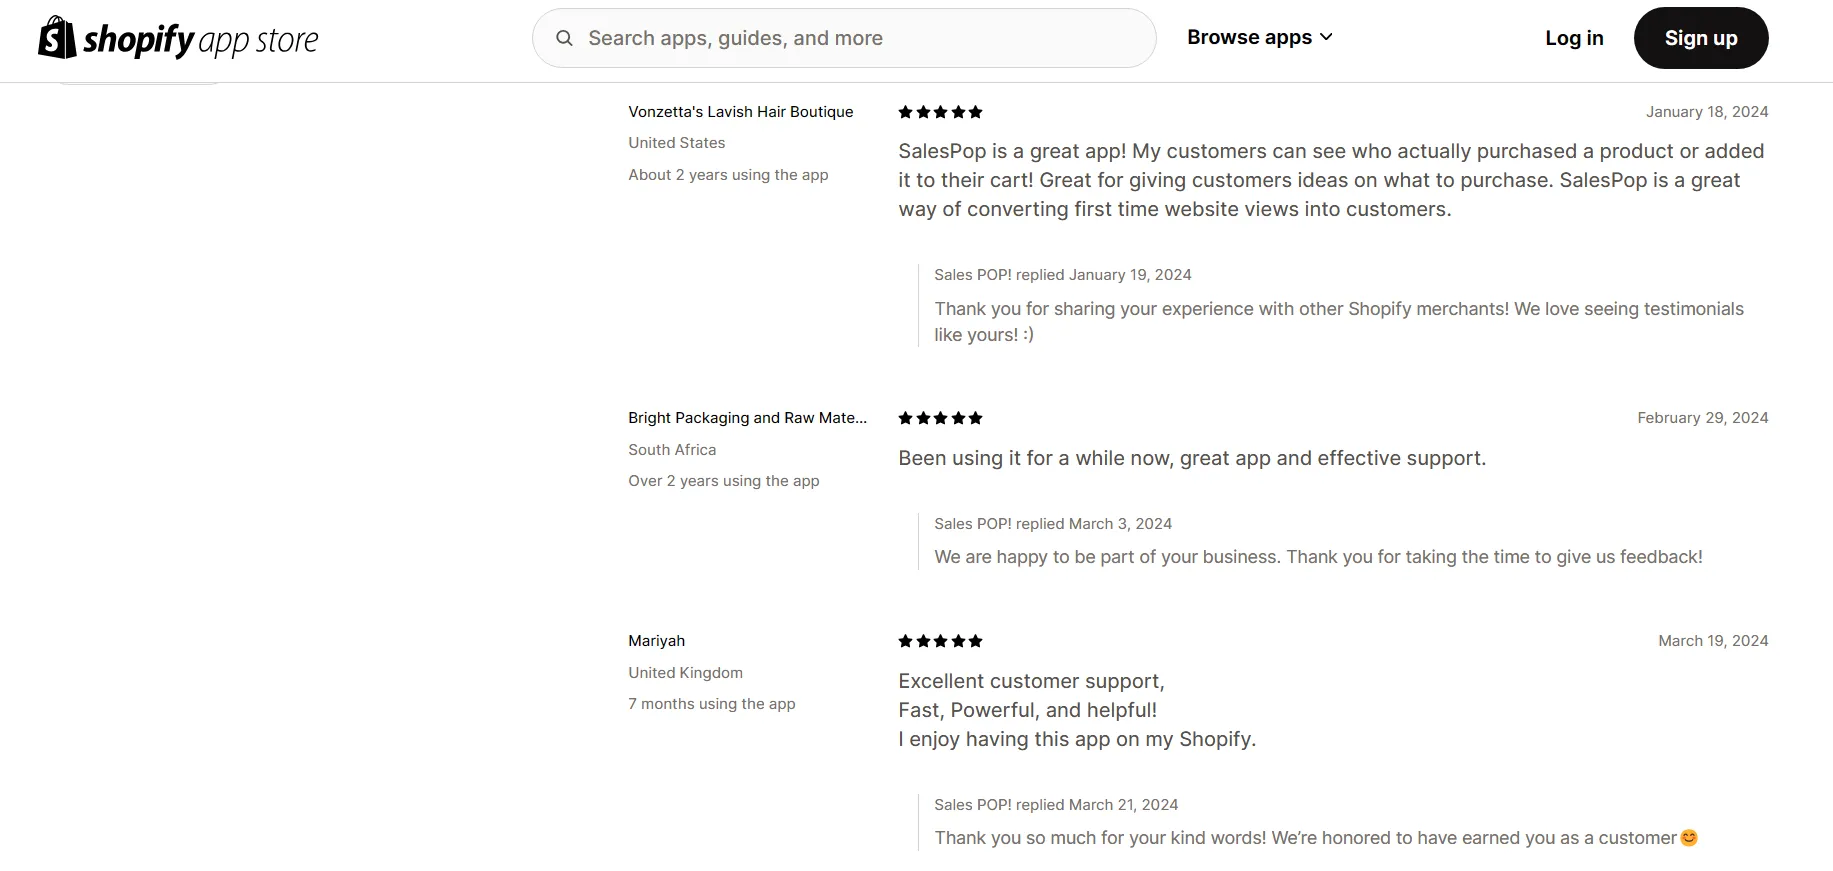 Reviews of Sales Pop by Customers